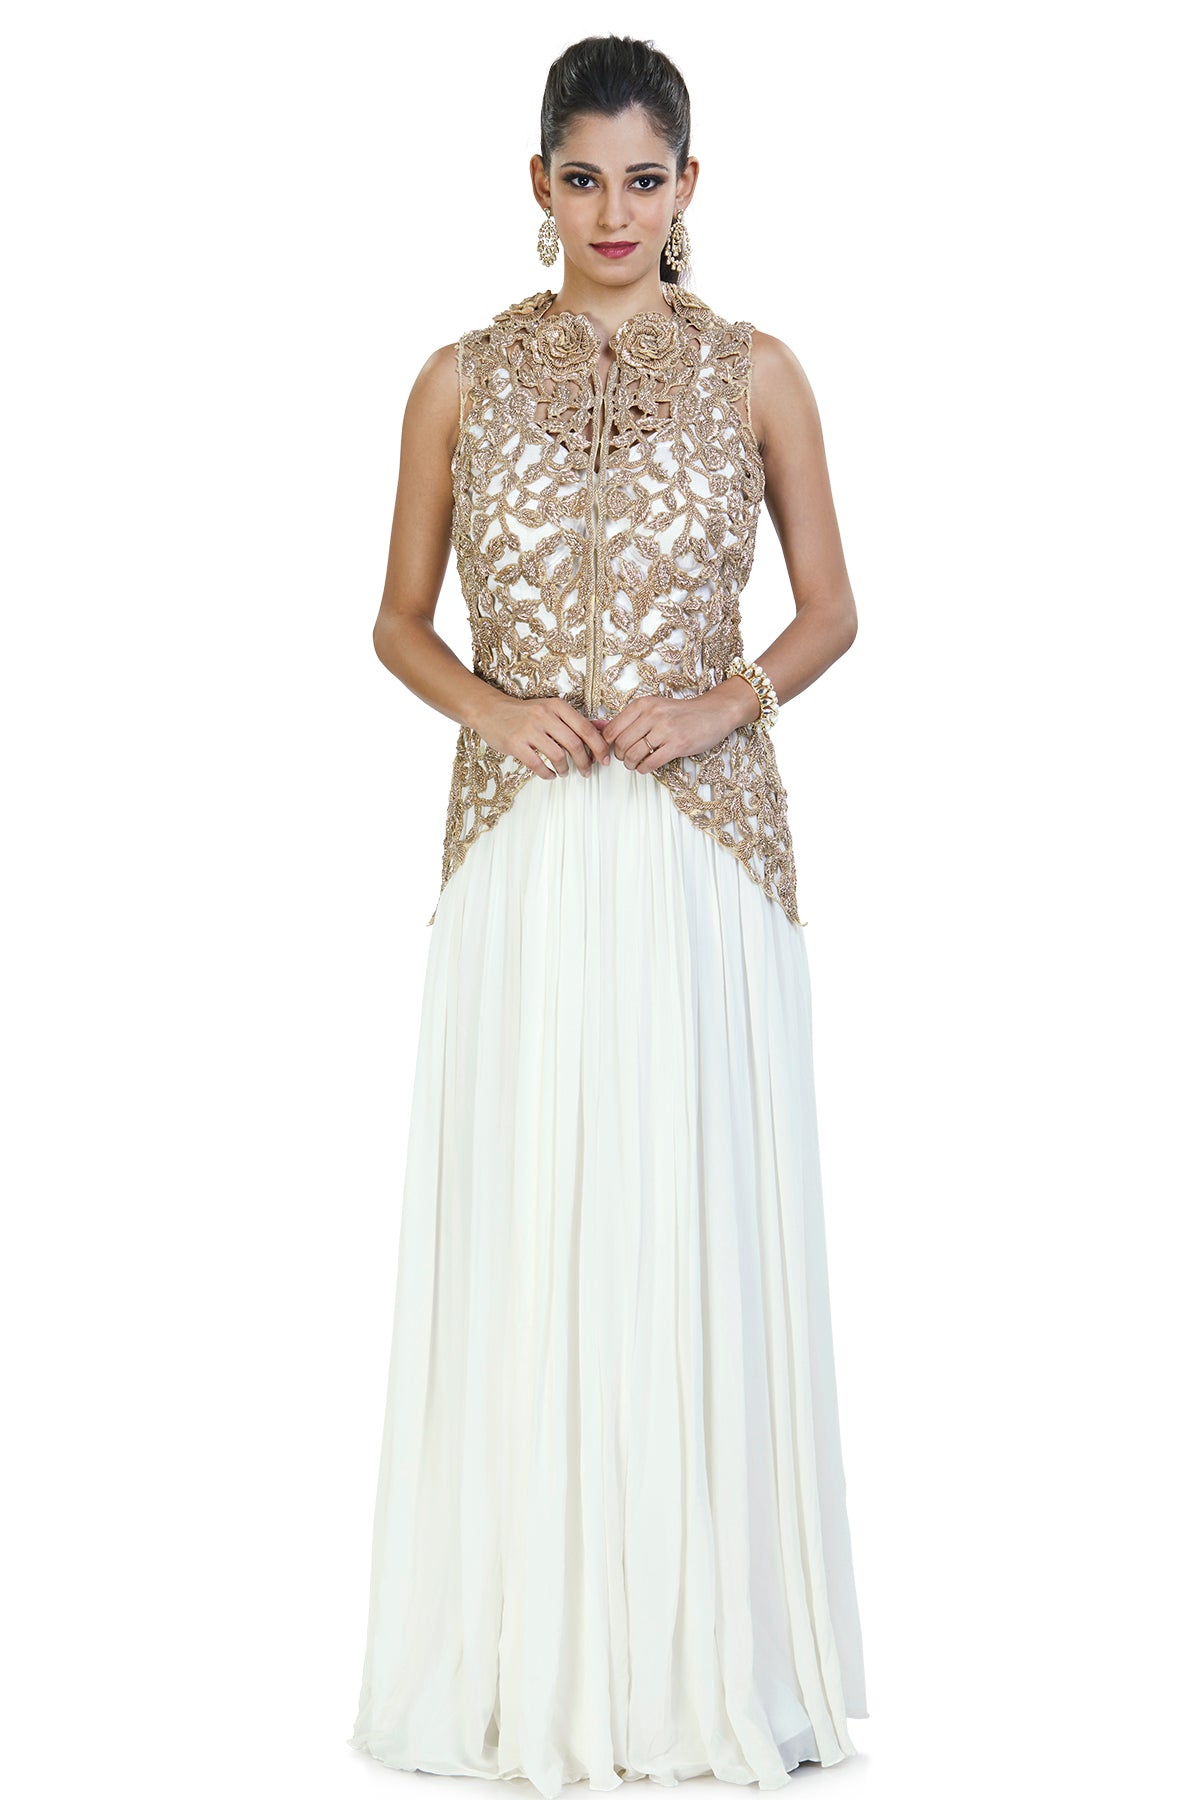 This enchanting white evening jumpsuit is perfect for your best friend's sangeet ceremony. It is enhanced with the golden cage work on its delicate jacket using cut-dana.